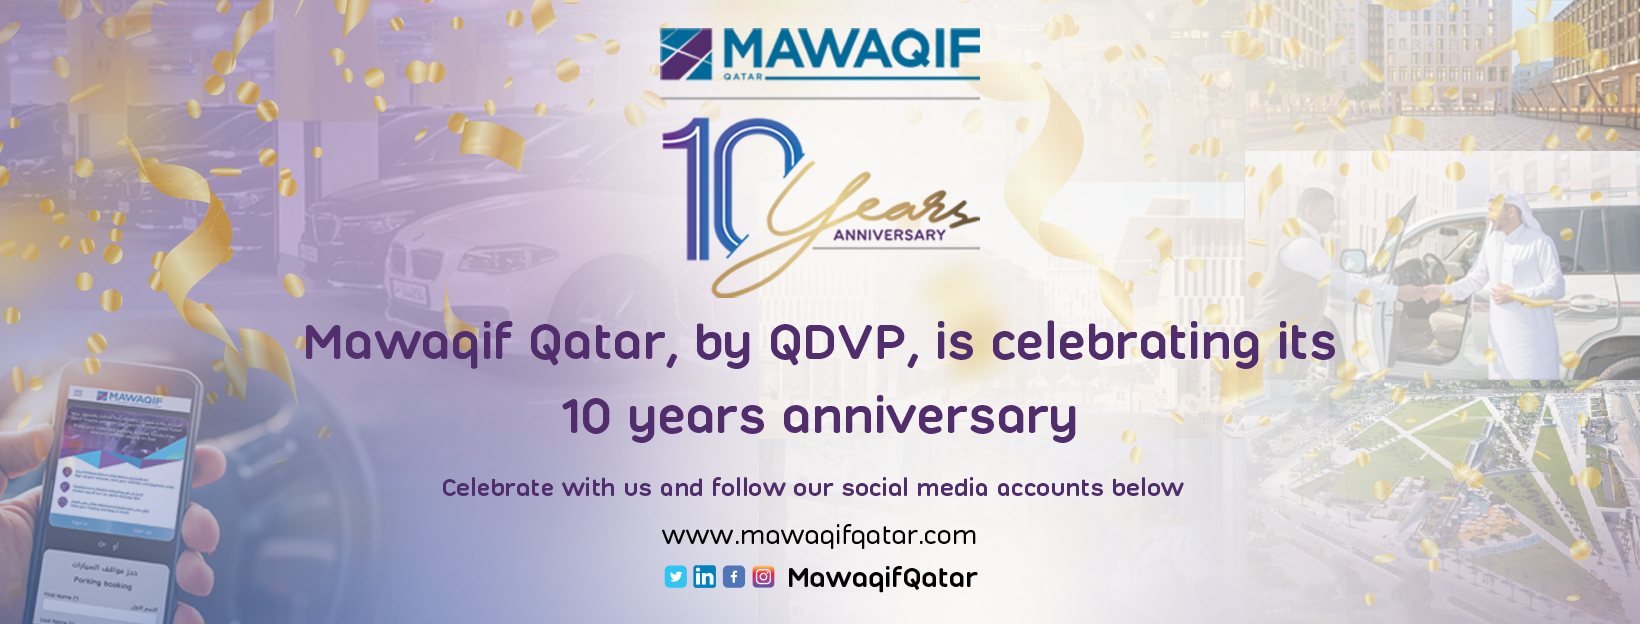 Mawaqif Qatar: Join us on our 10th anniversary celebration and receive a mystery gift!